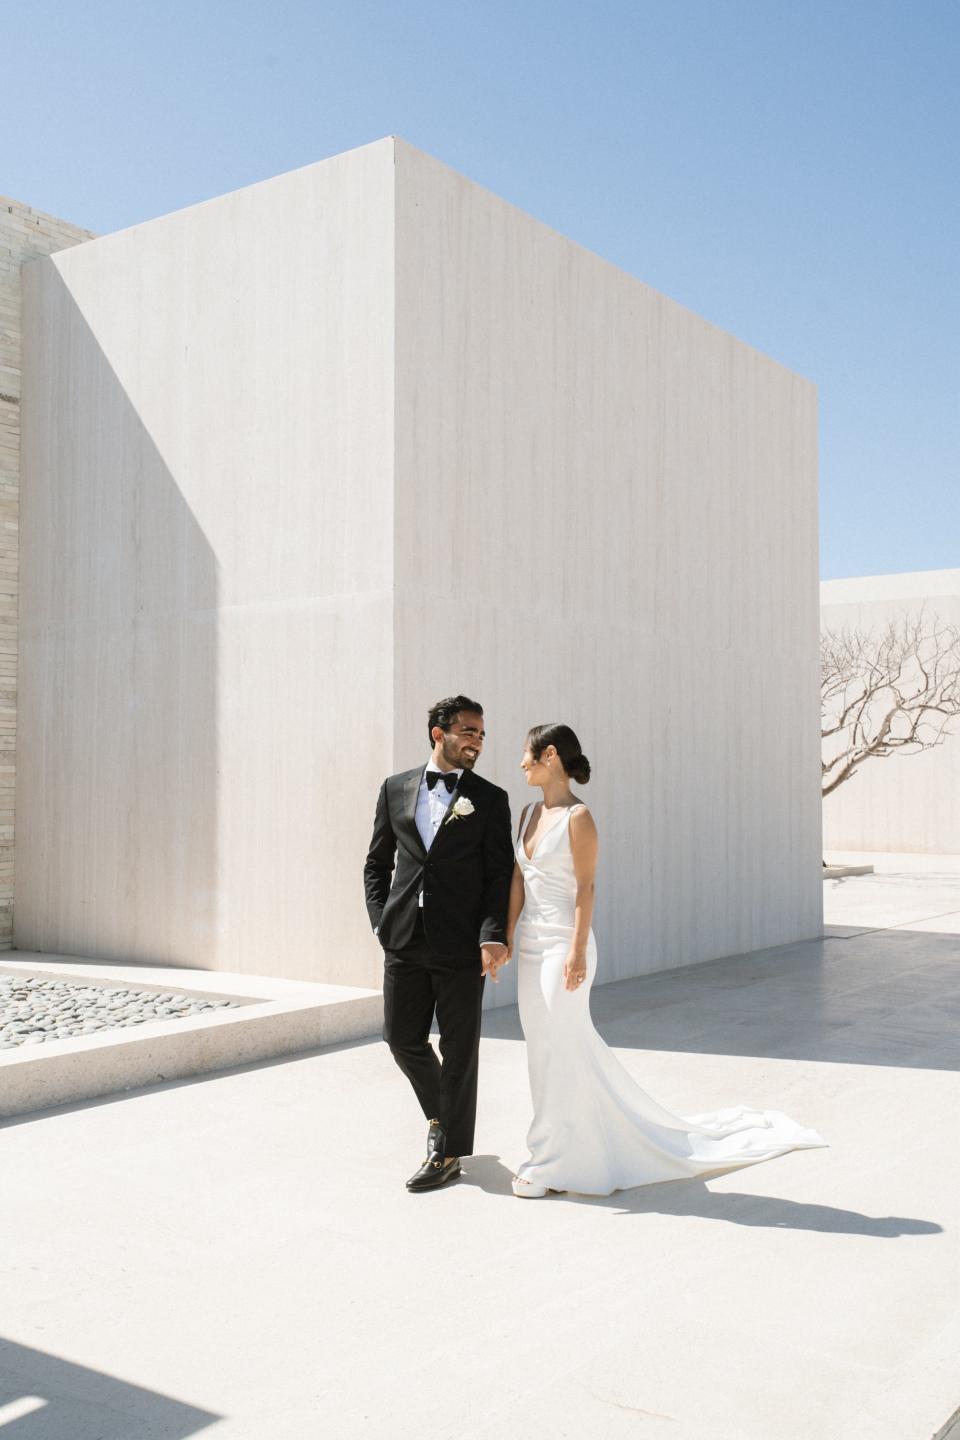 A bride and groom look at each other in their wedding attire and walk down a stone path.